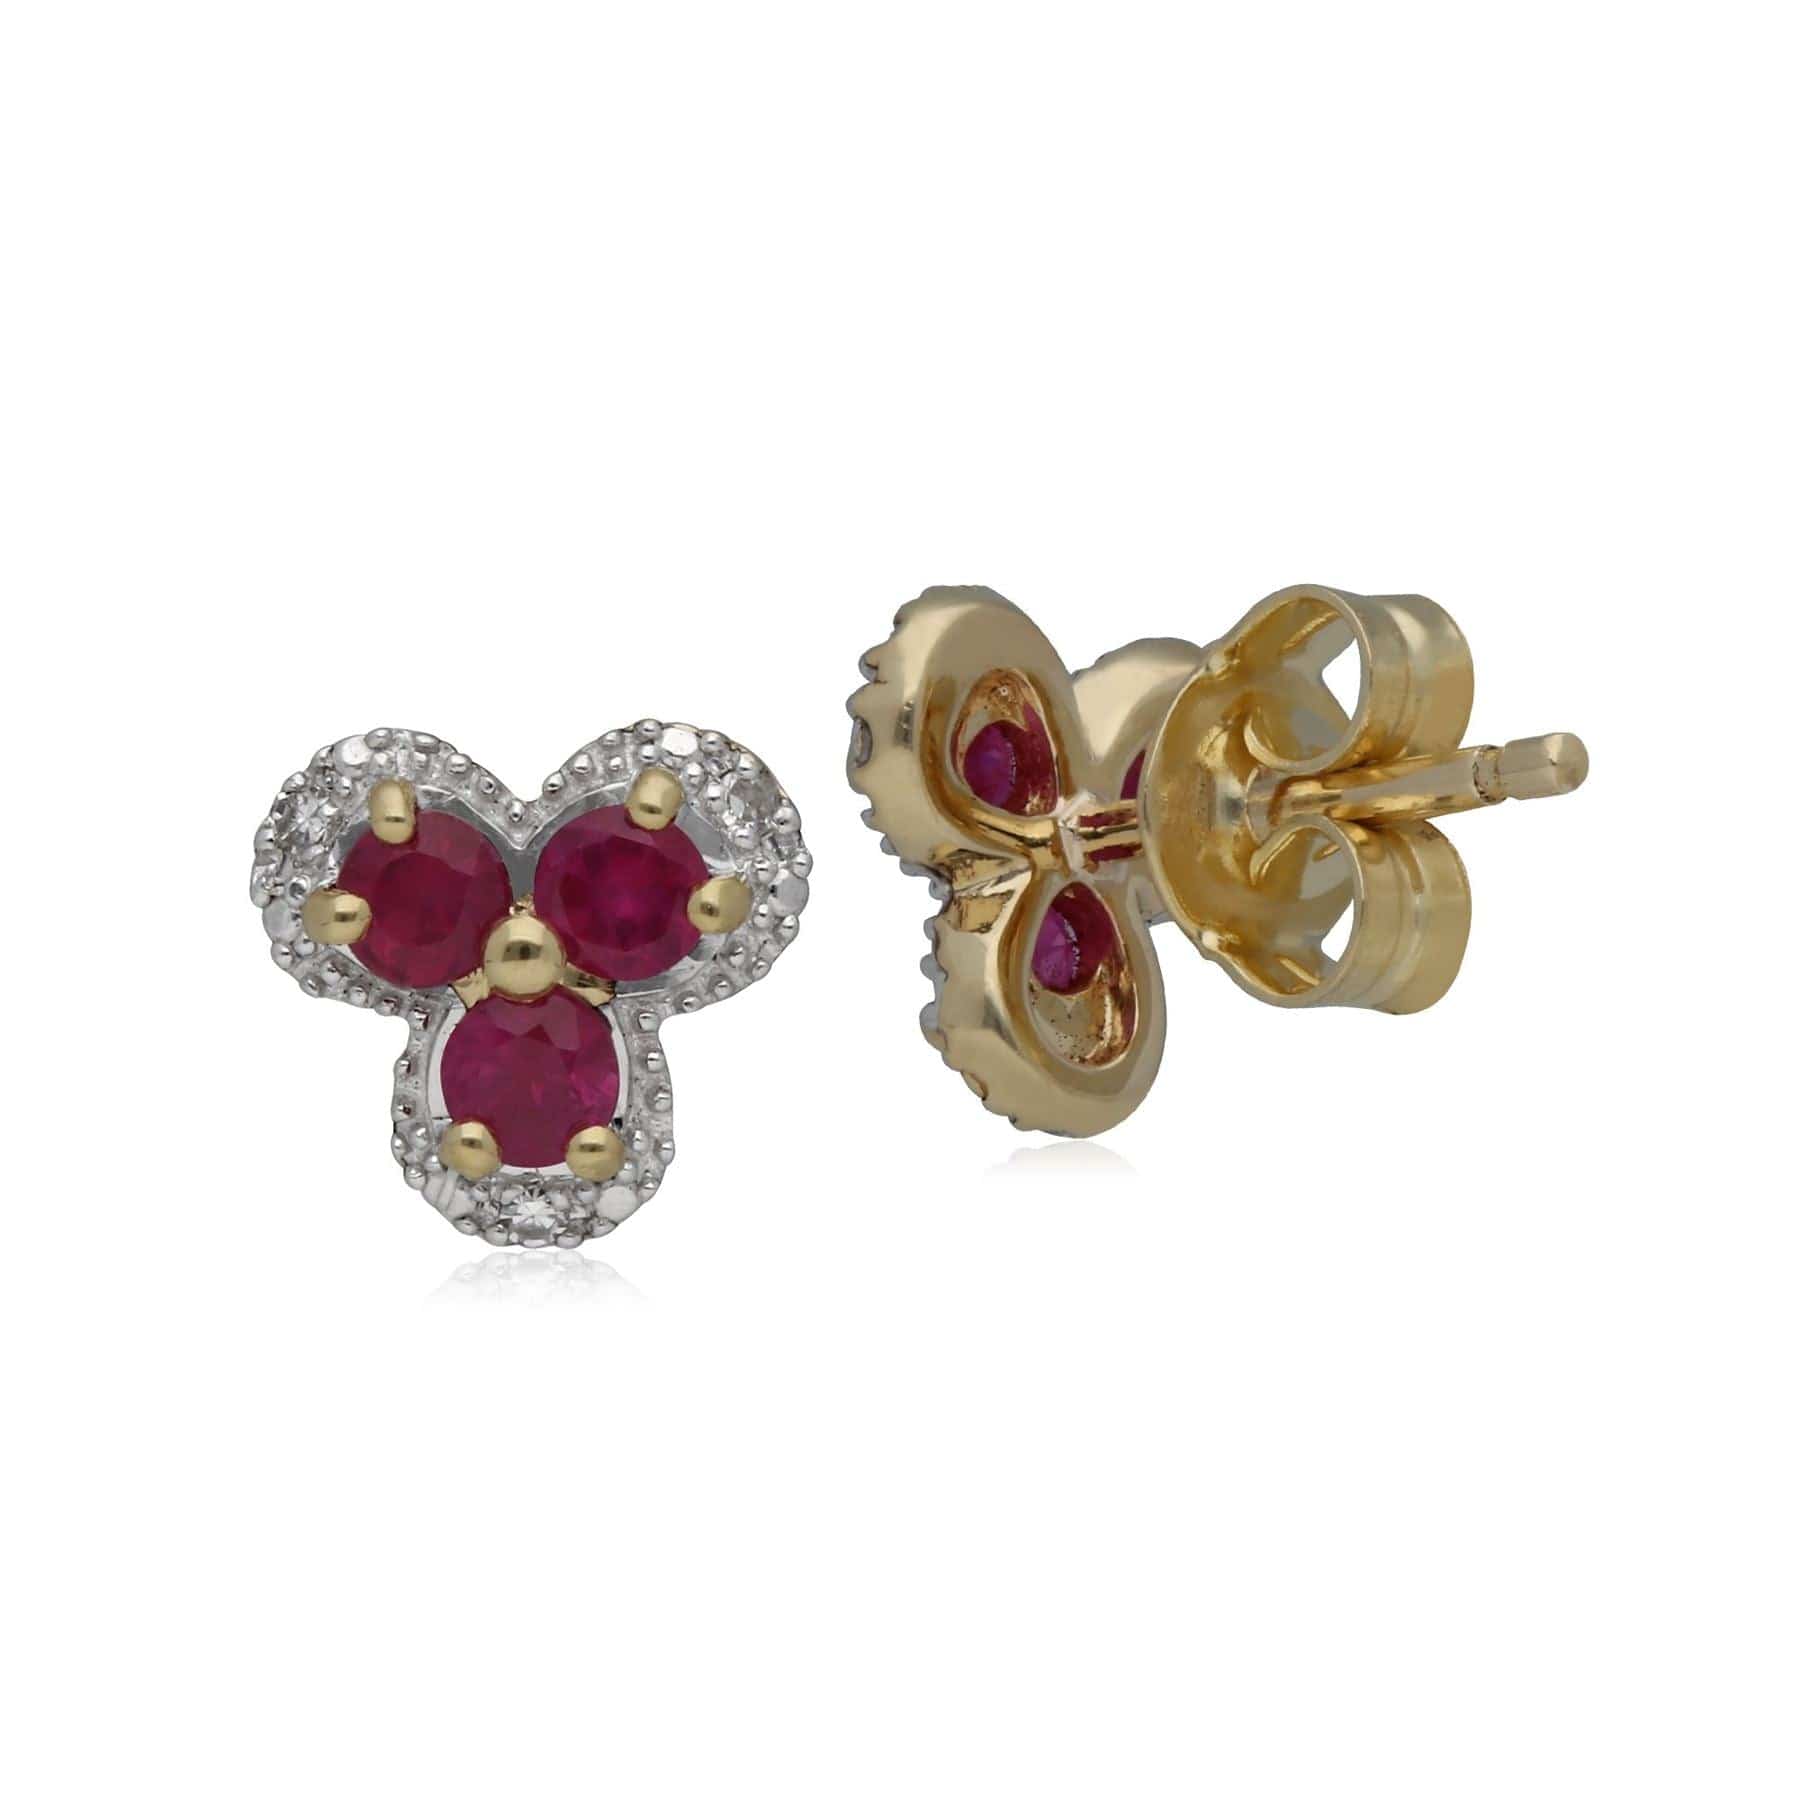 183E1133029 Classic Floral Ruby & Diamond Stud Earrings in 9ct Yellow Gold 2